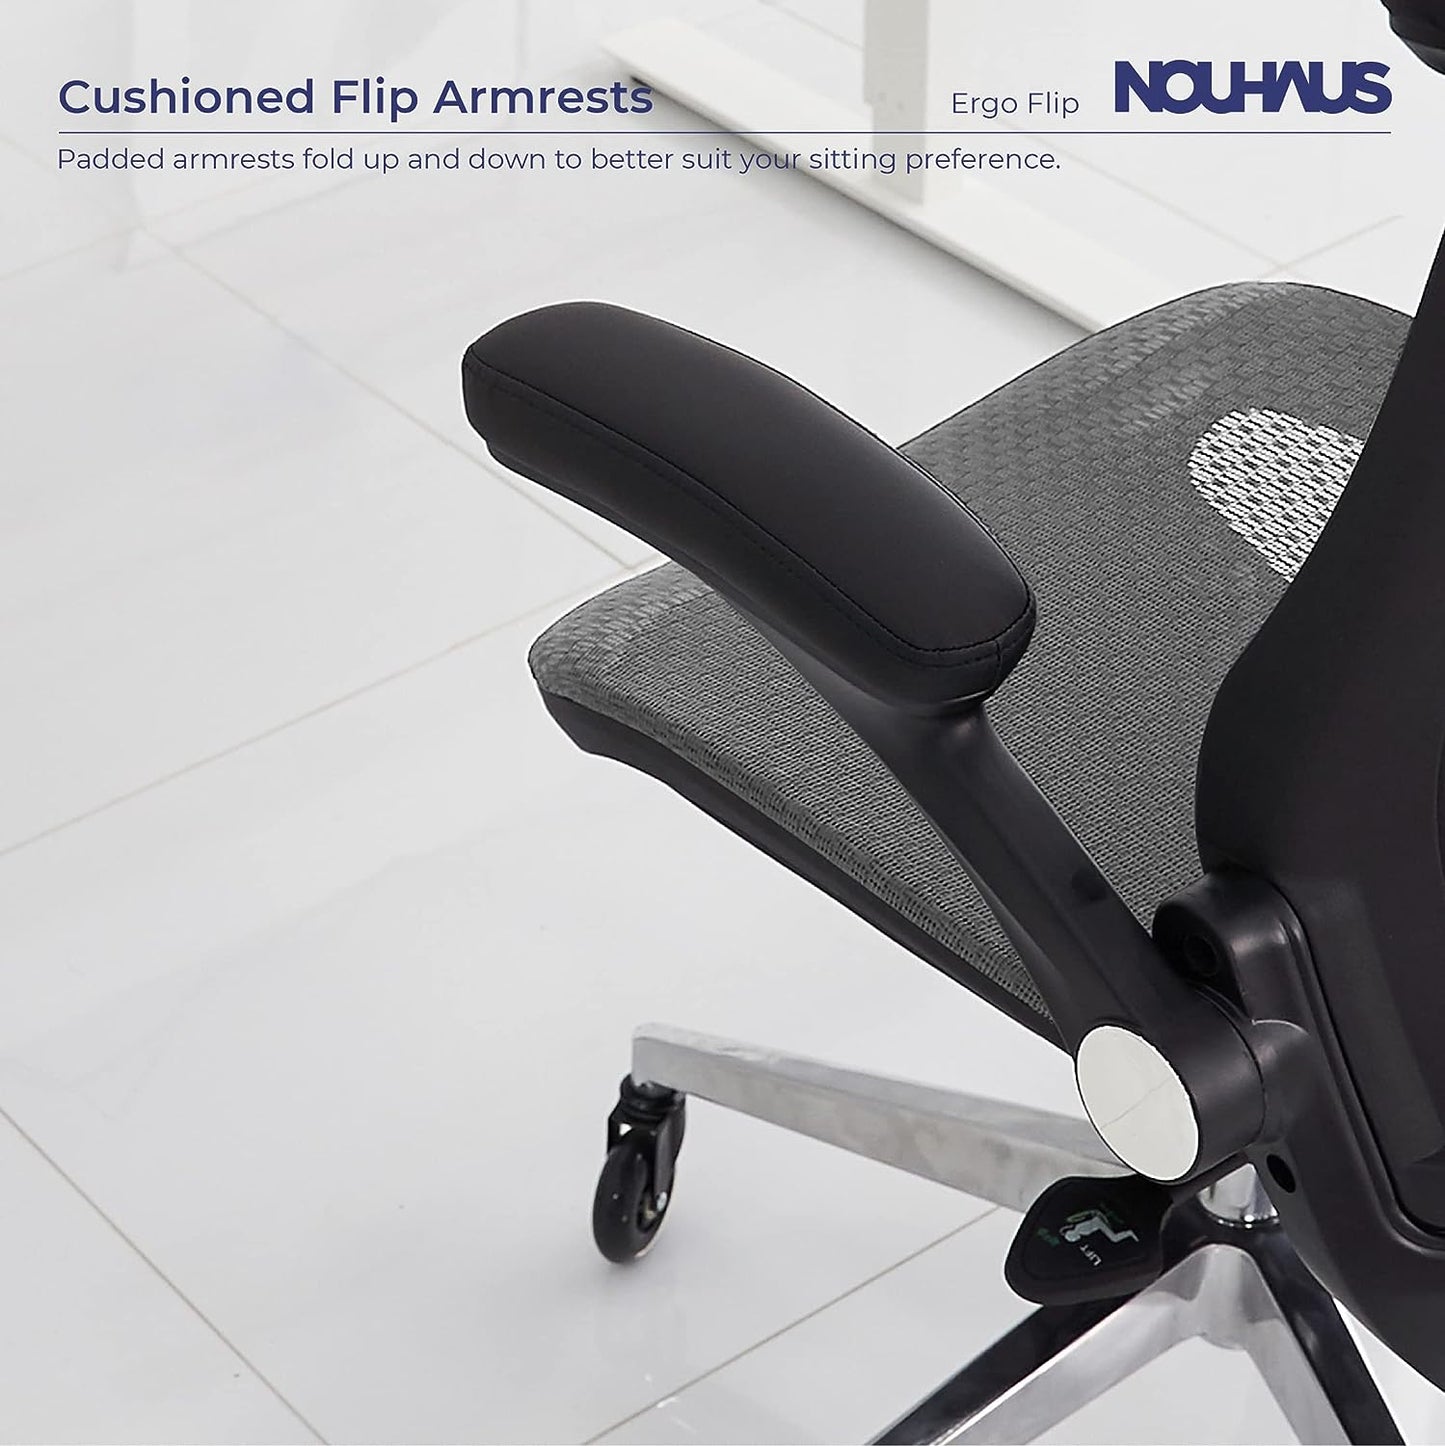 ErgoFlip Mesh Computer Chair - Grey Rolling Desk Chair with Retractable Armrest and Blade Wheels Ergonomic Office Chair, Desk Chairs, Executive Swivel Chair/High Spec Base